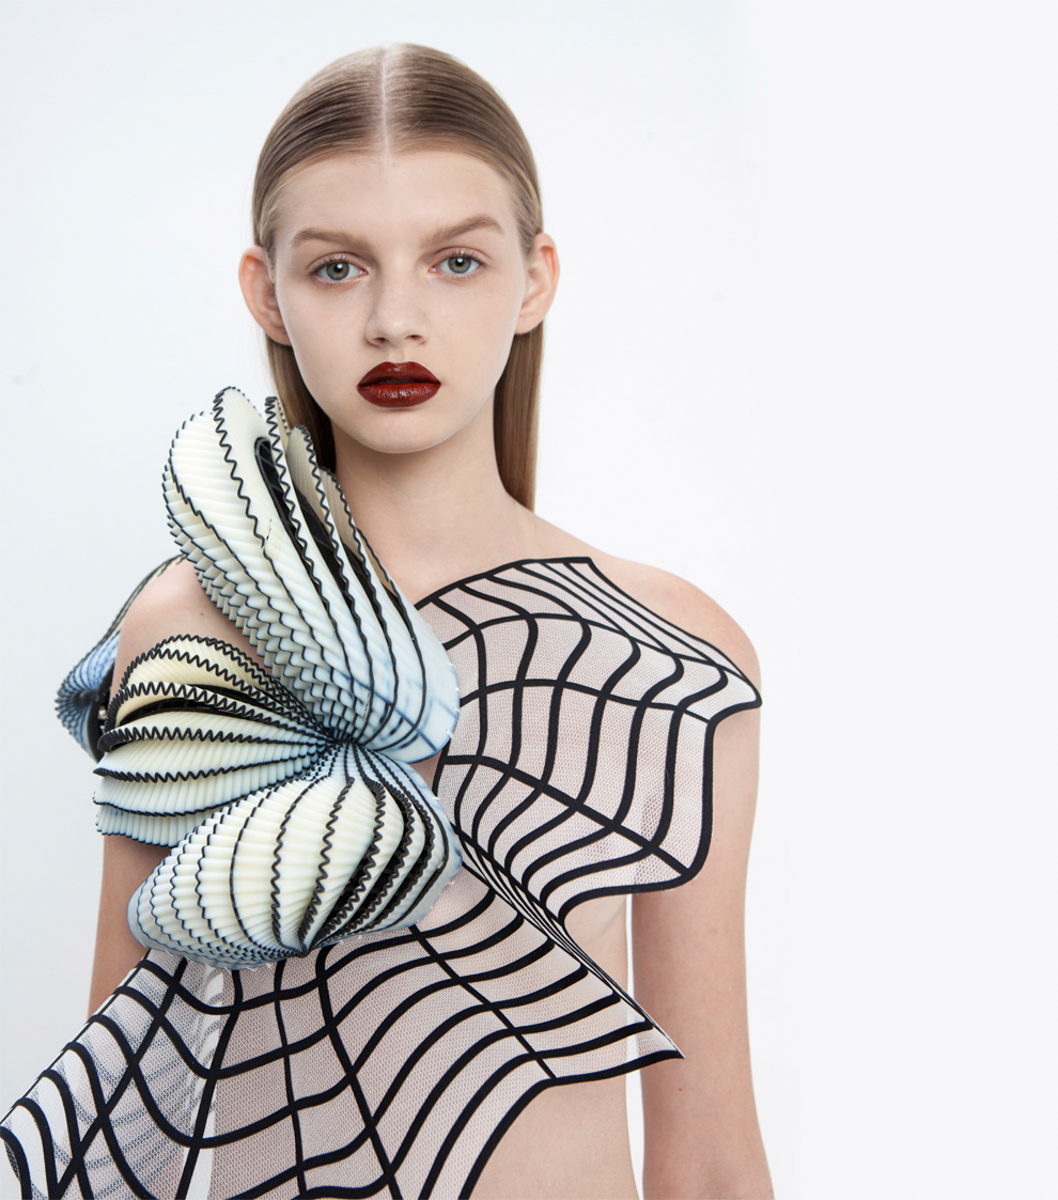 A Line of 3D Printed Clothing Based on Defects